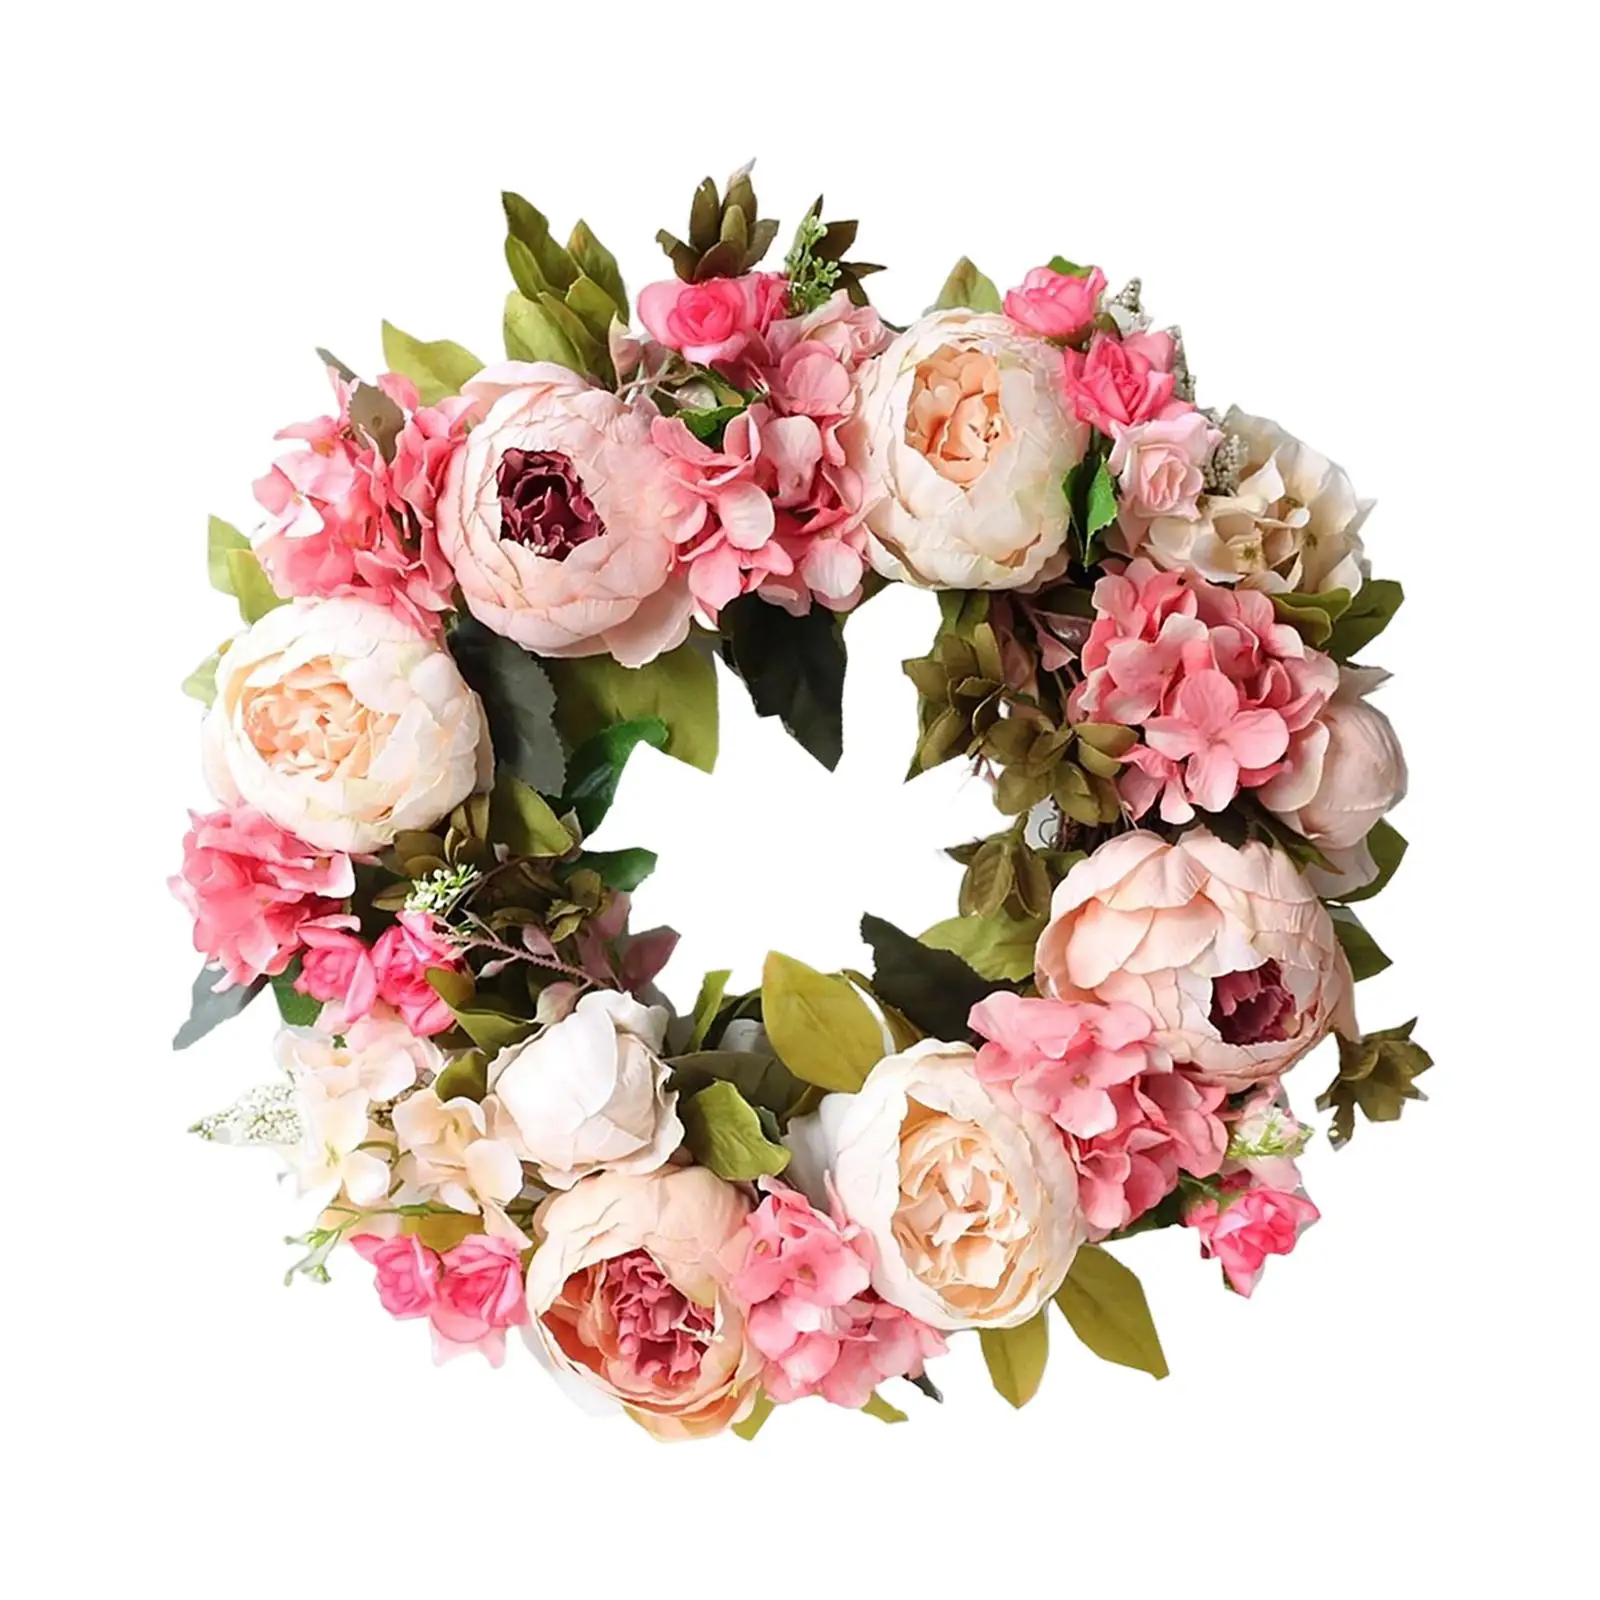 Handmade Peony Flowers Artificial Wreath Faux Floral Wreath 40cm for Indoor Outdoor Holiday Wedding Decorative Photography Props